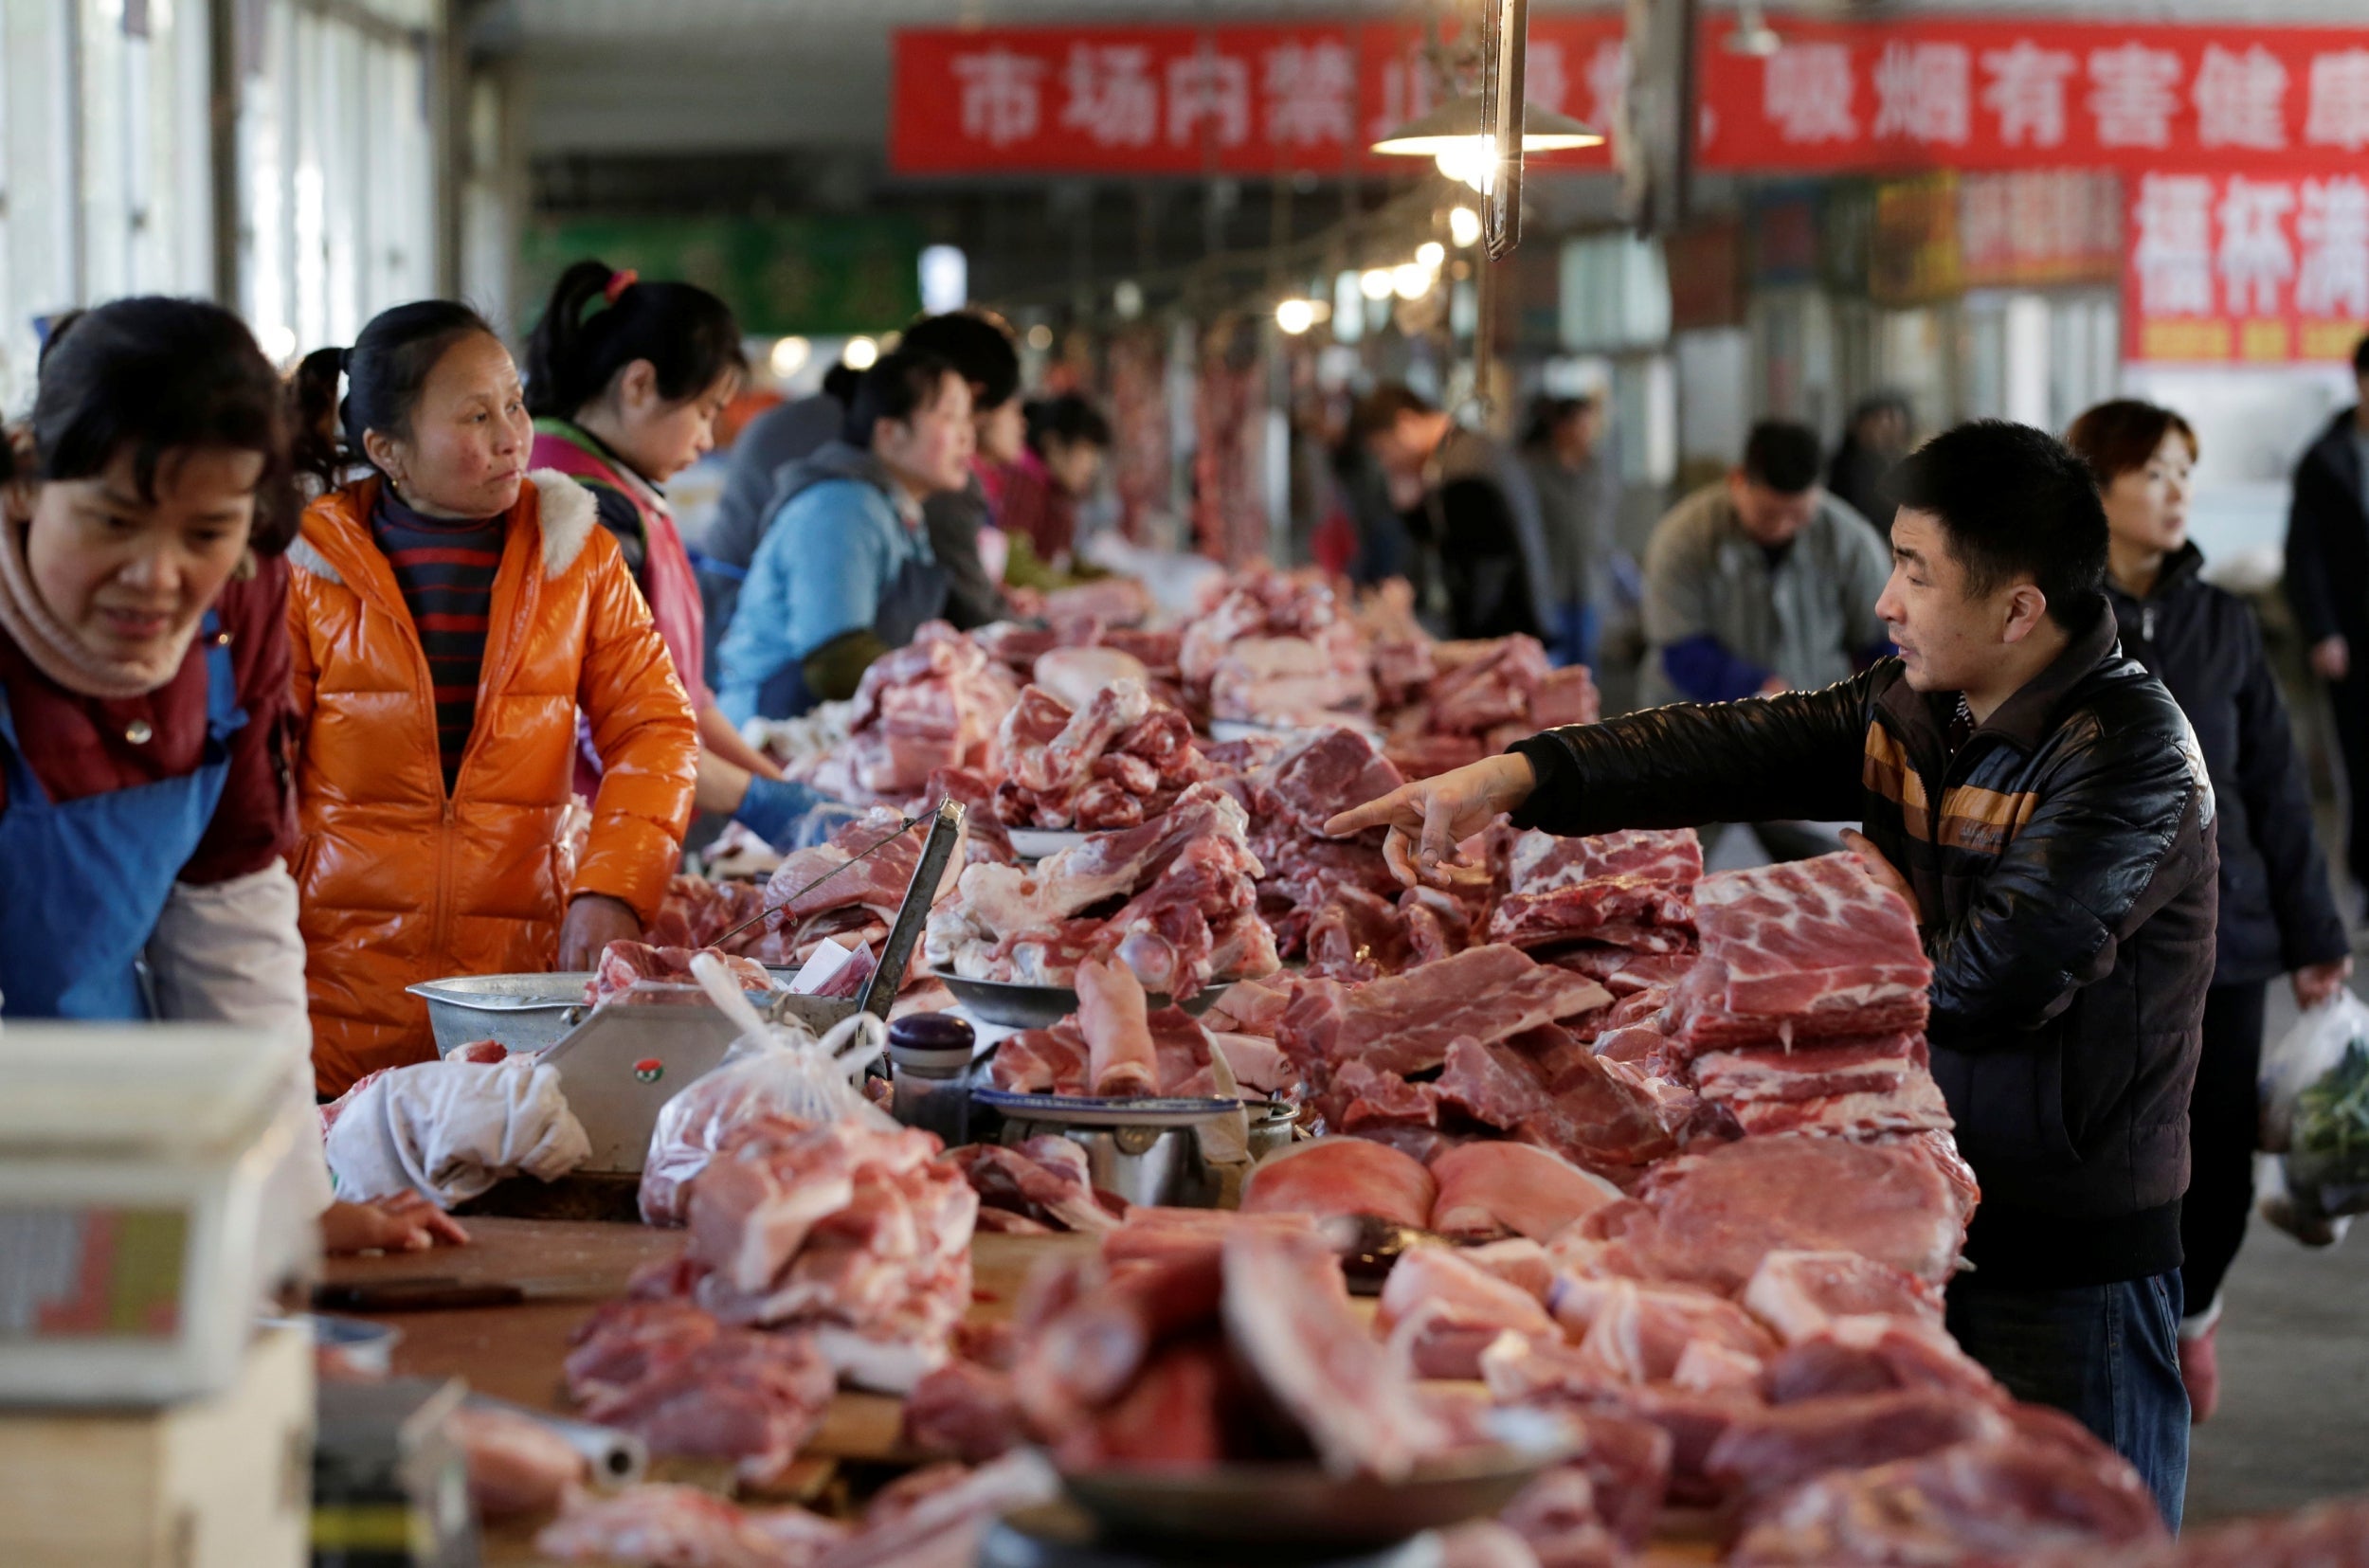 Meat stalls are seen at a market in Beijing, China